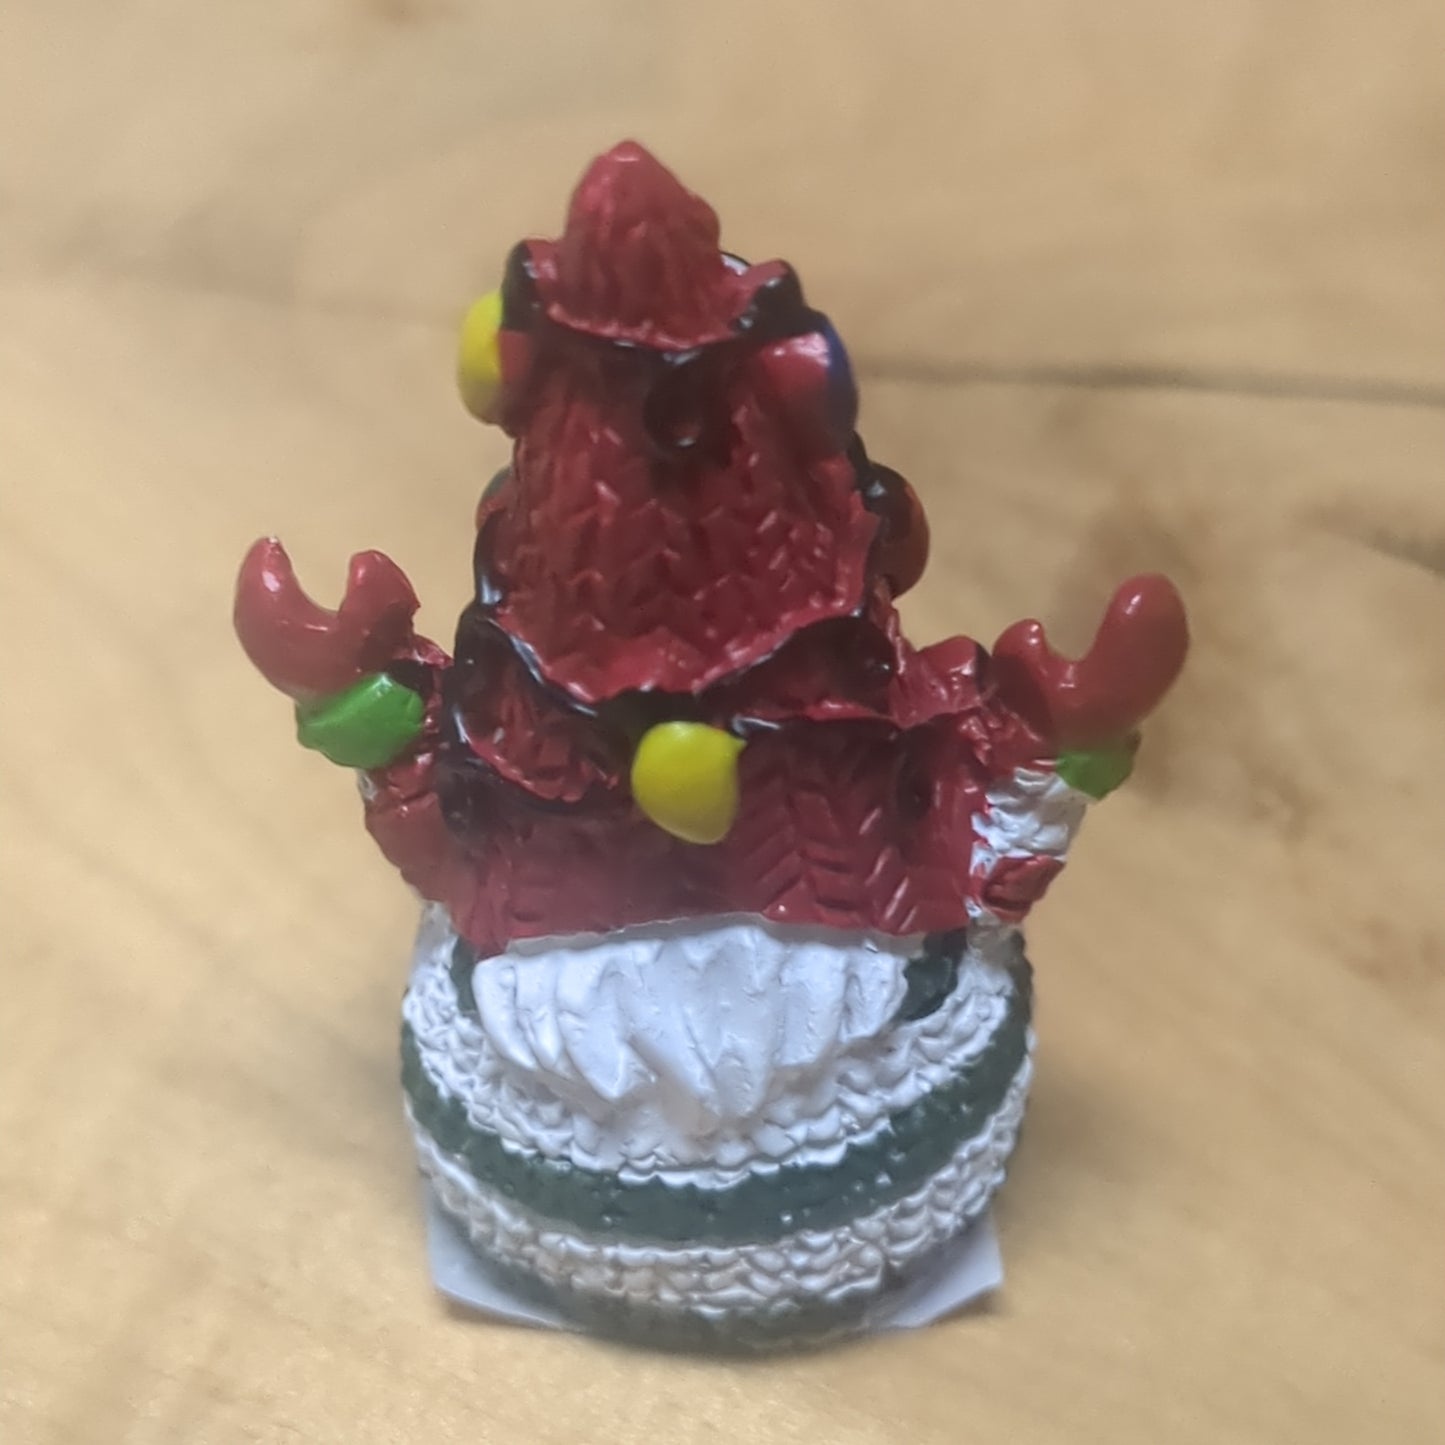 Gnome pocket charm with red hat.